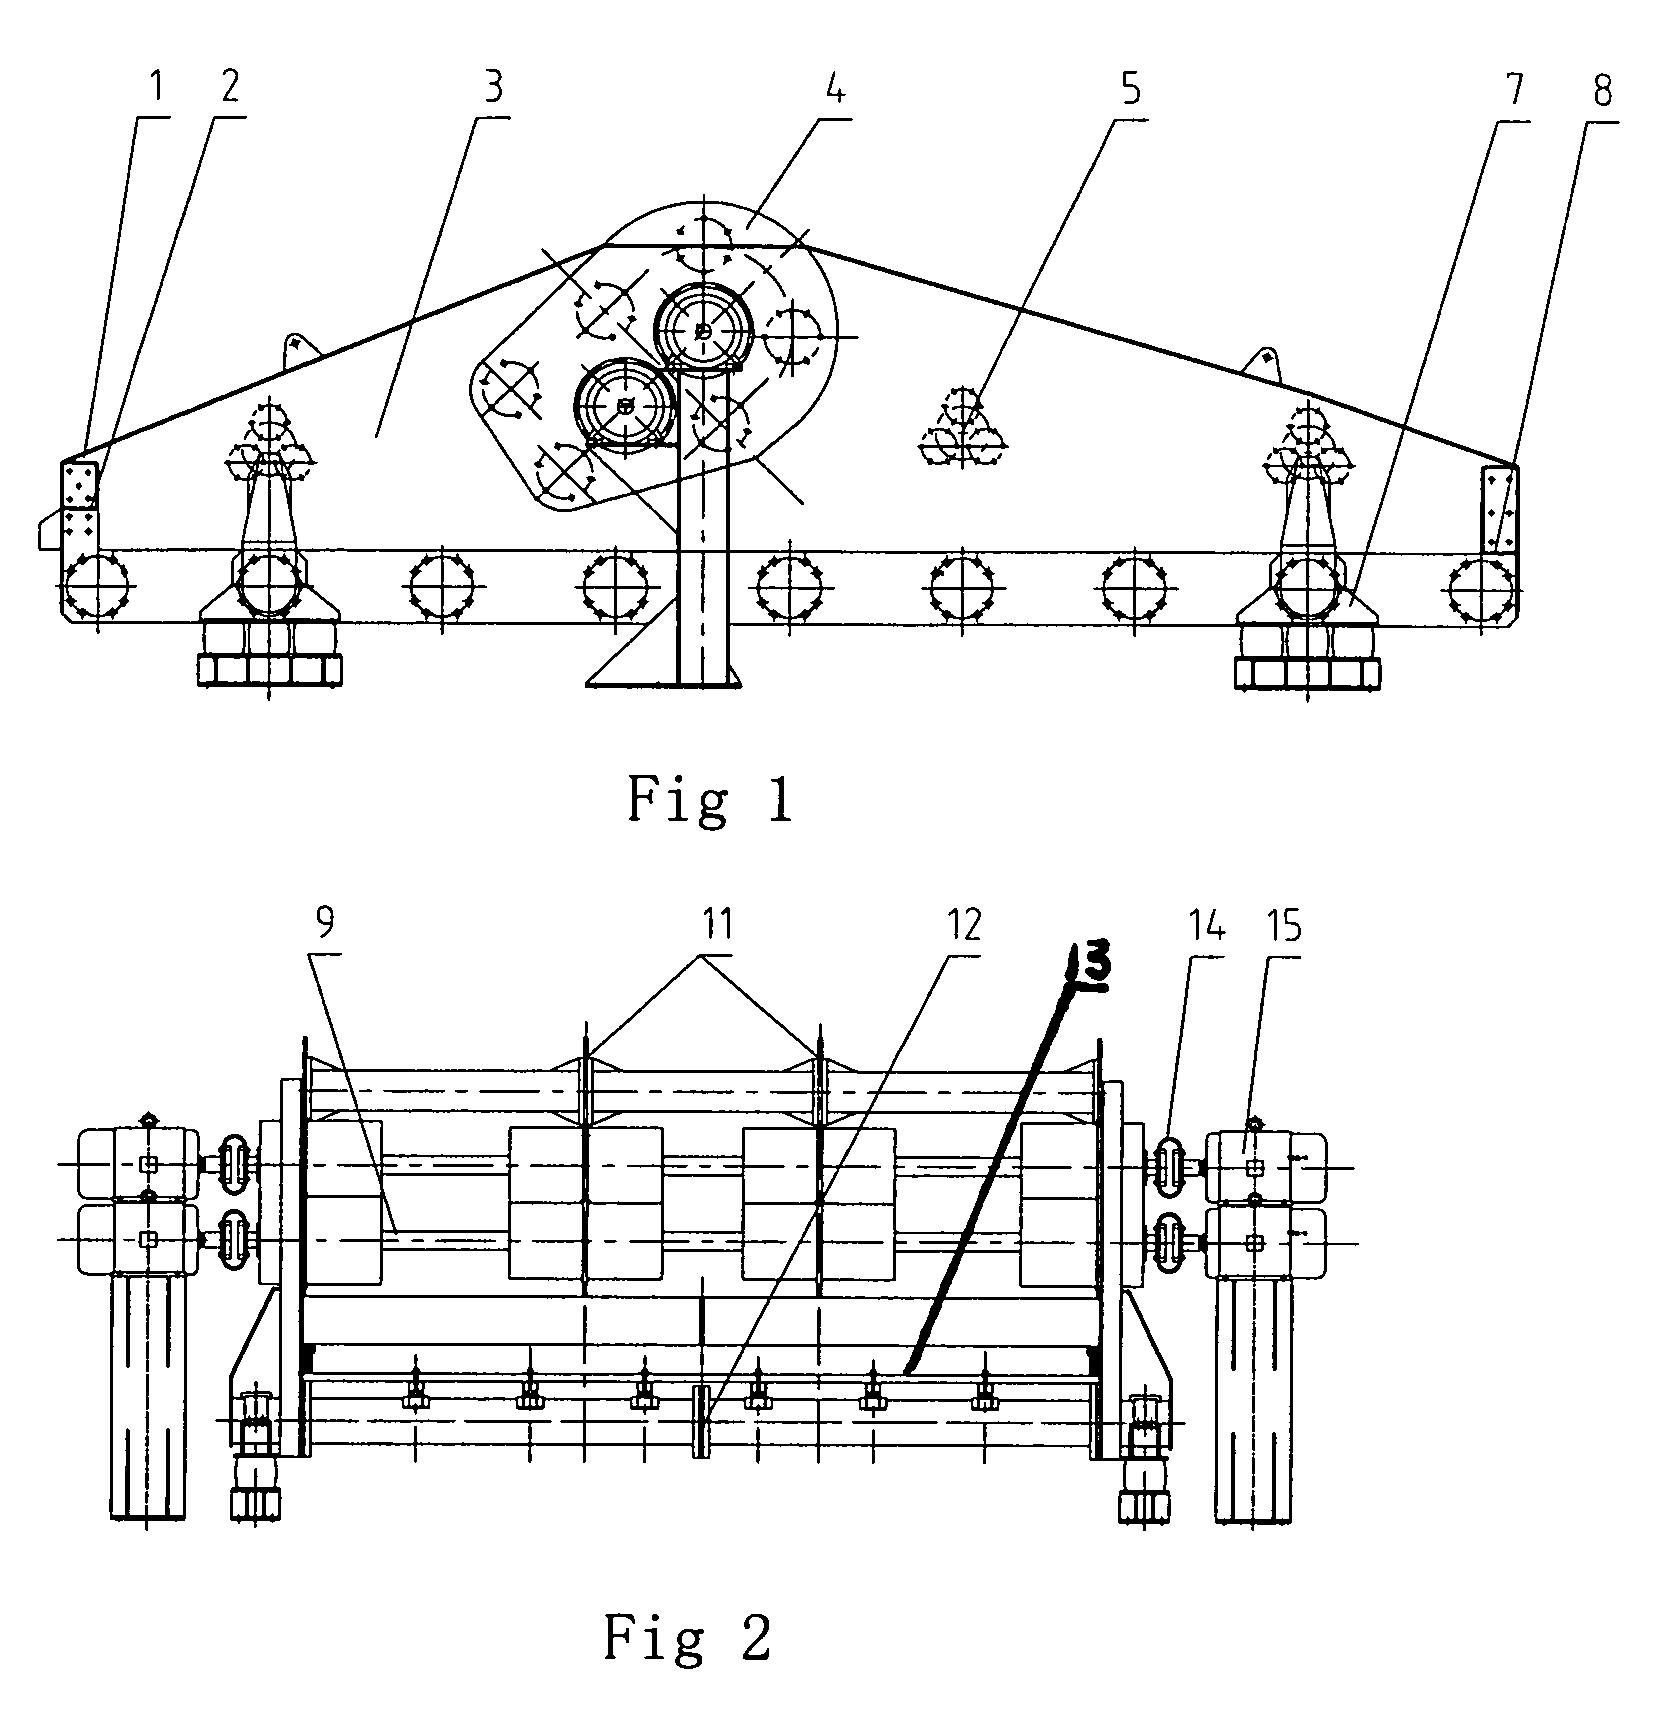 Extra-large vibrating screen with duplex statically indeterminate mesh beam